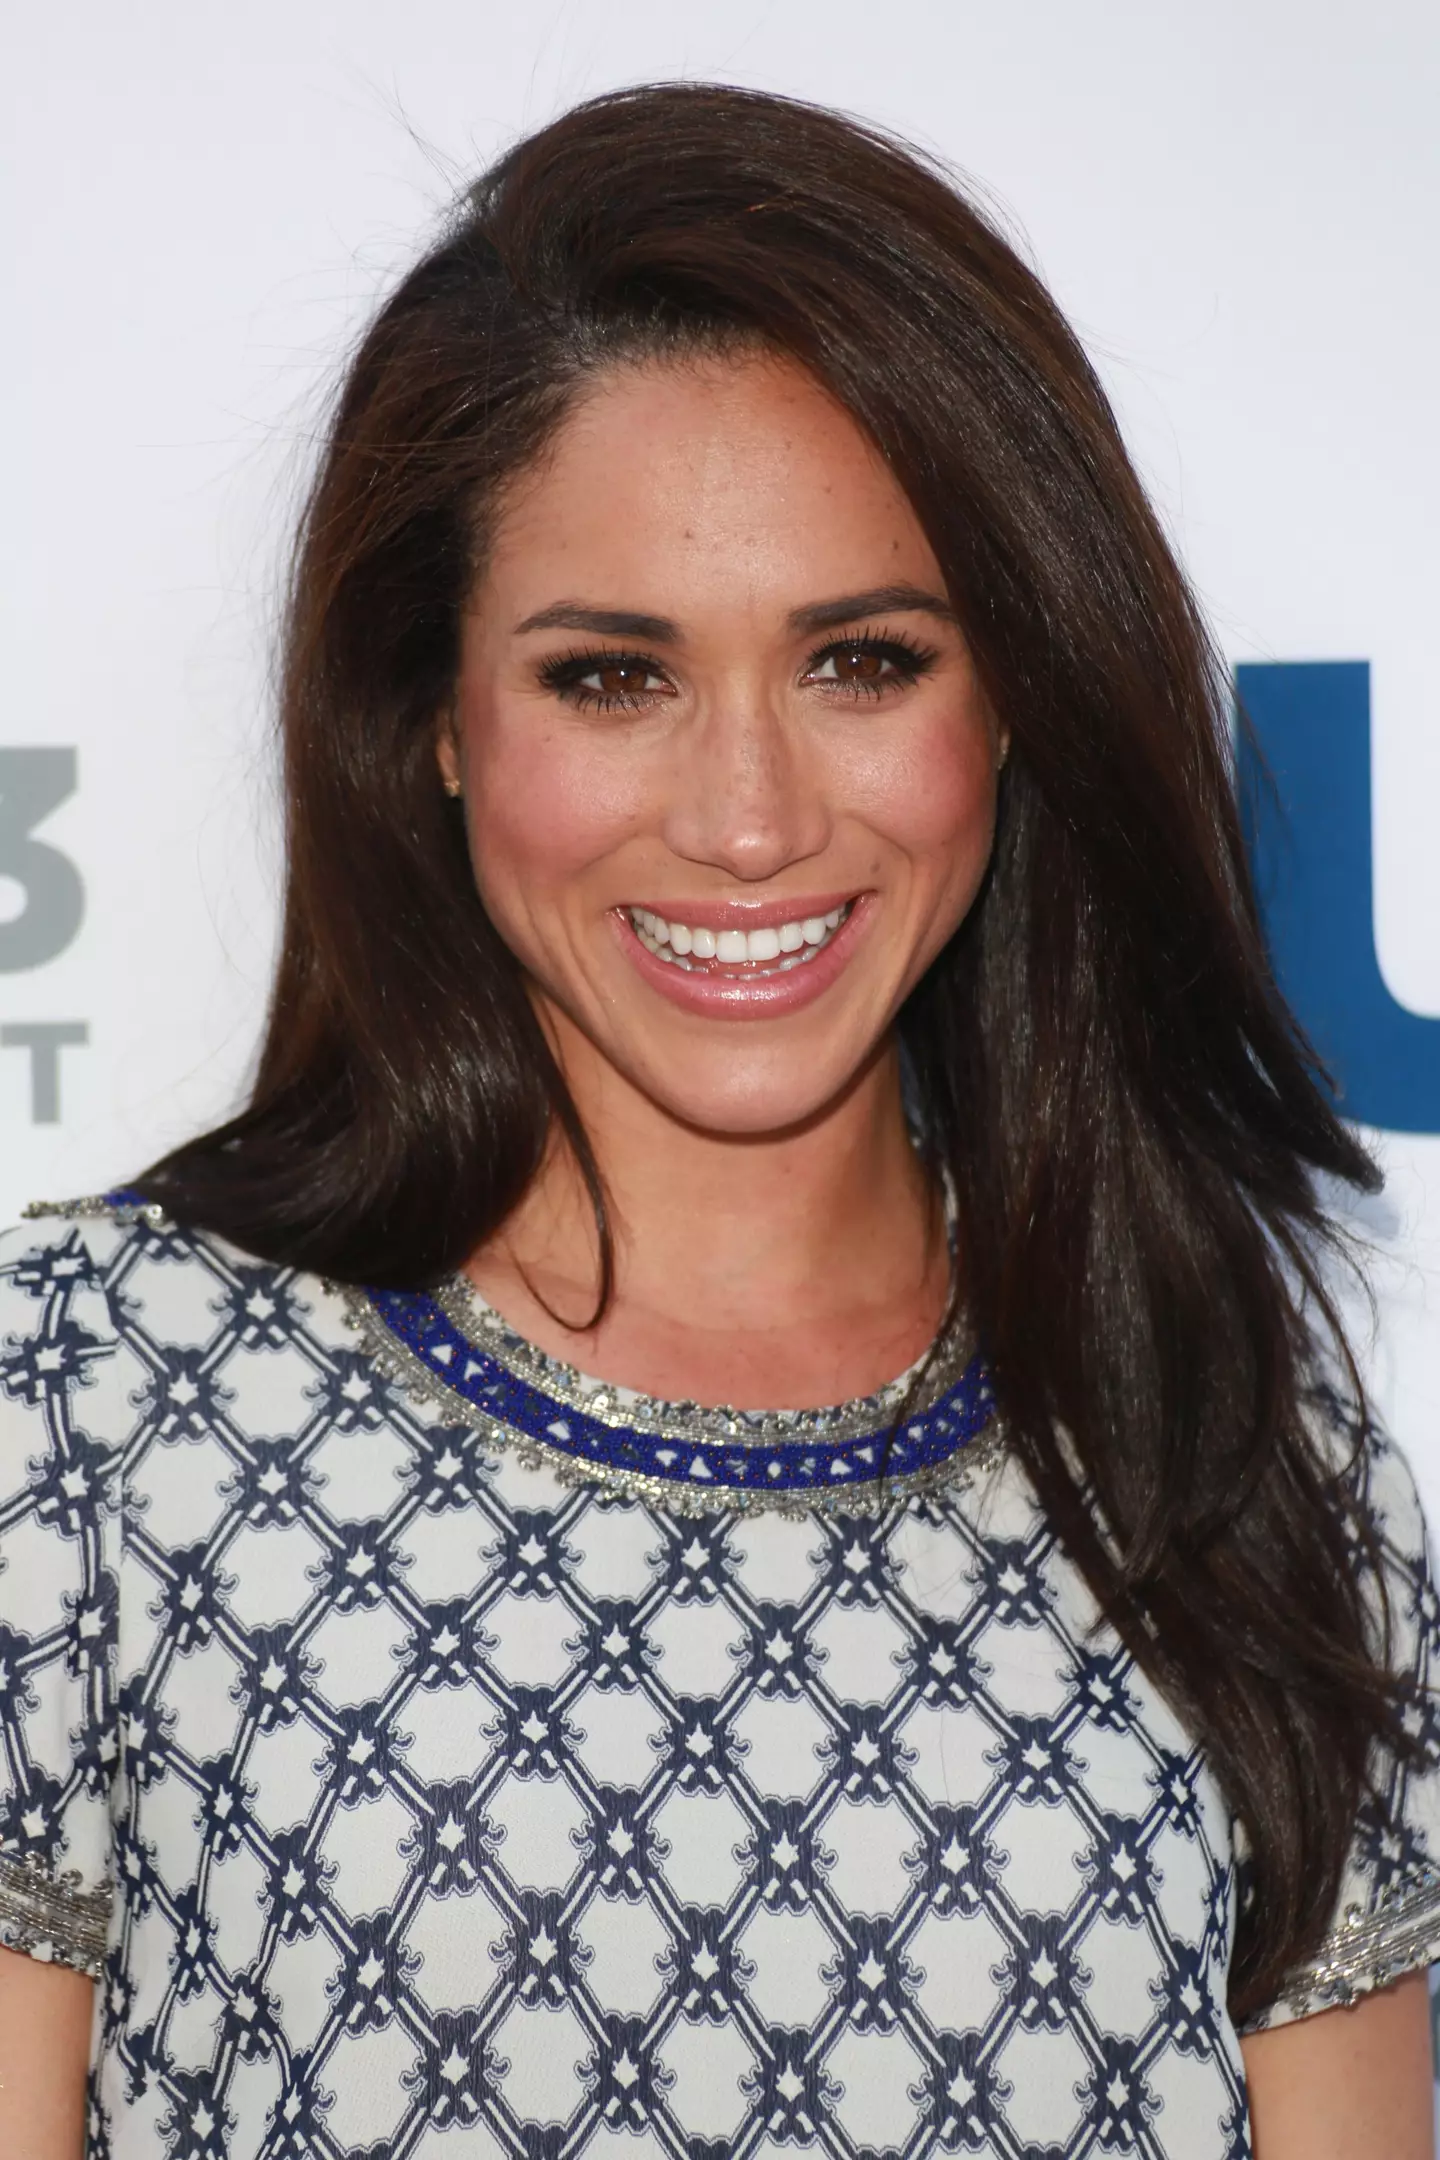 Meghan Markle has an almost 'perfect' face.